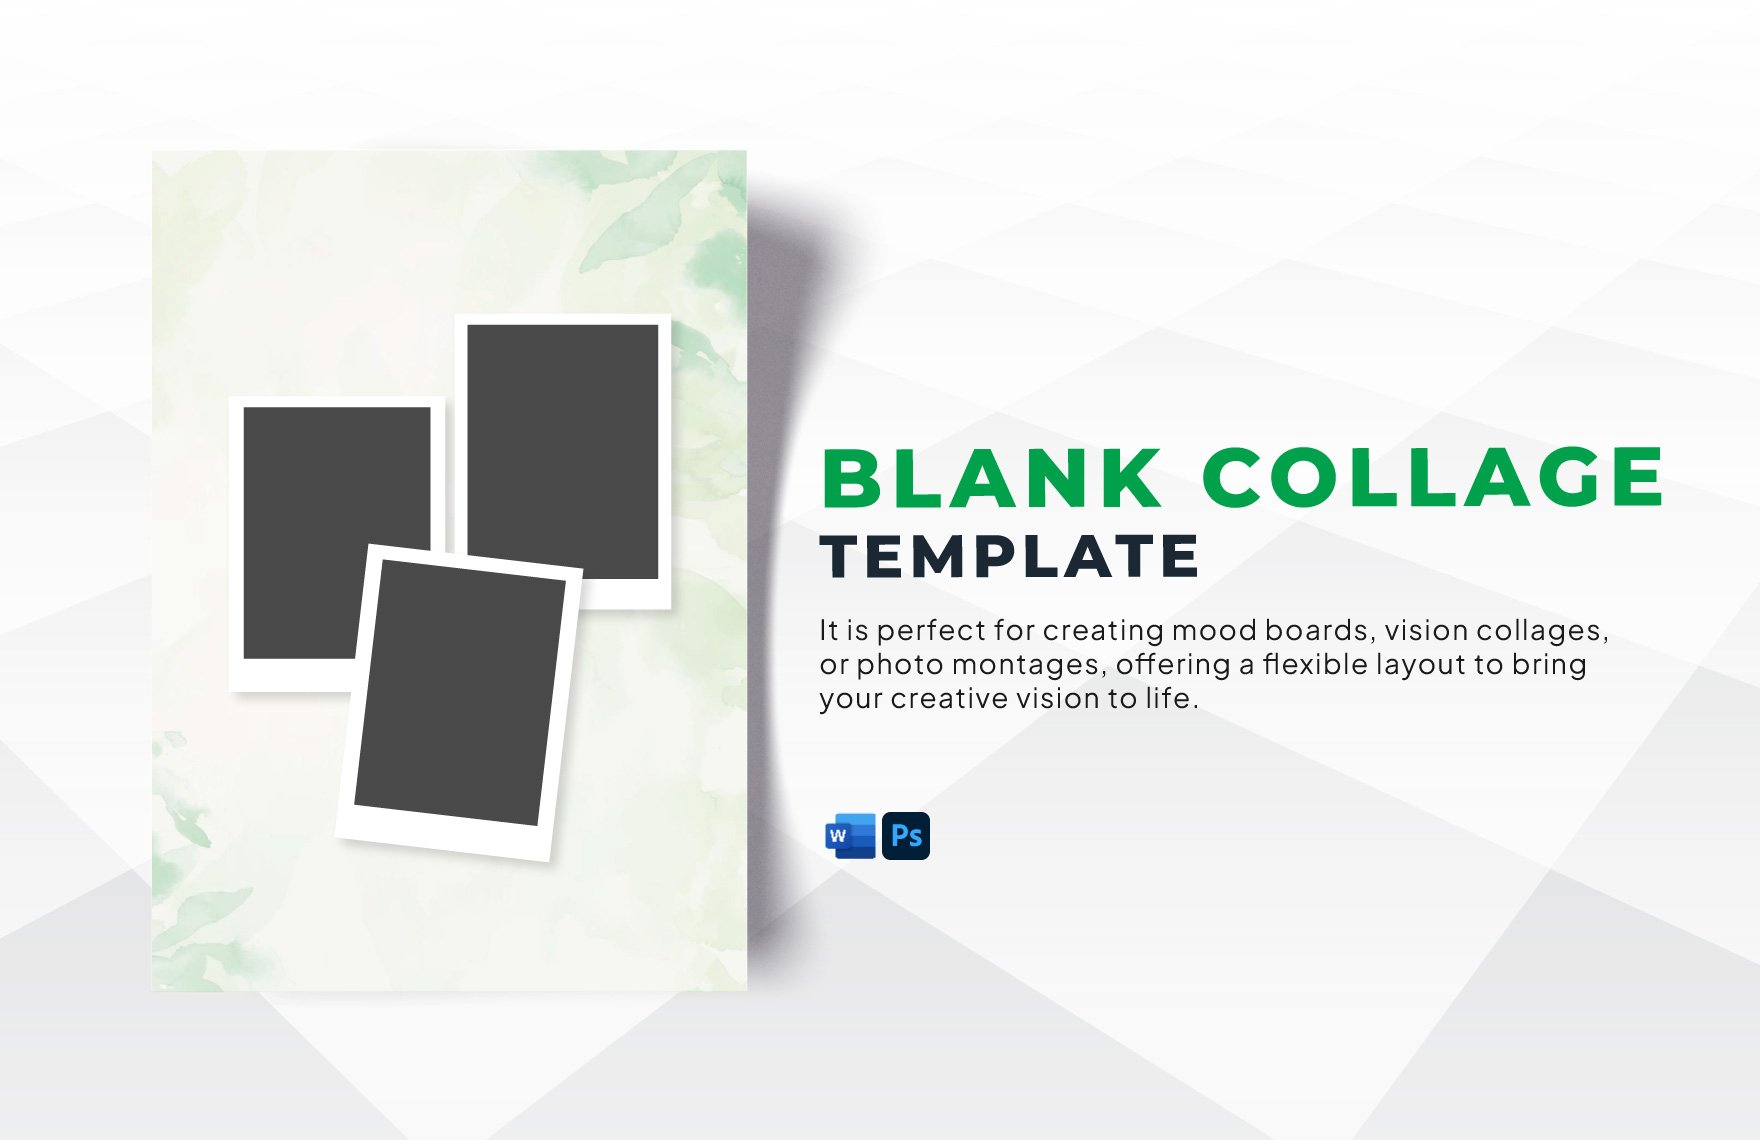 Blank Collage Template